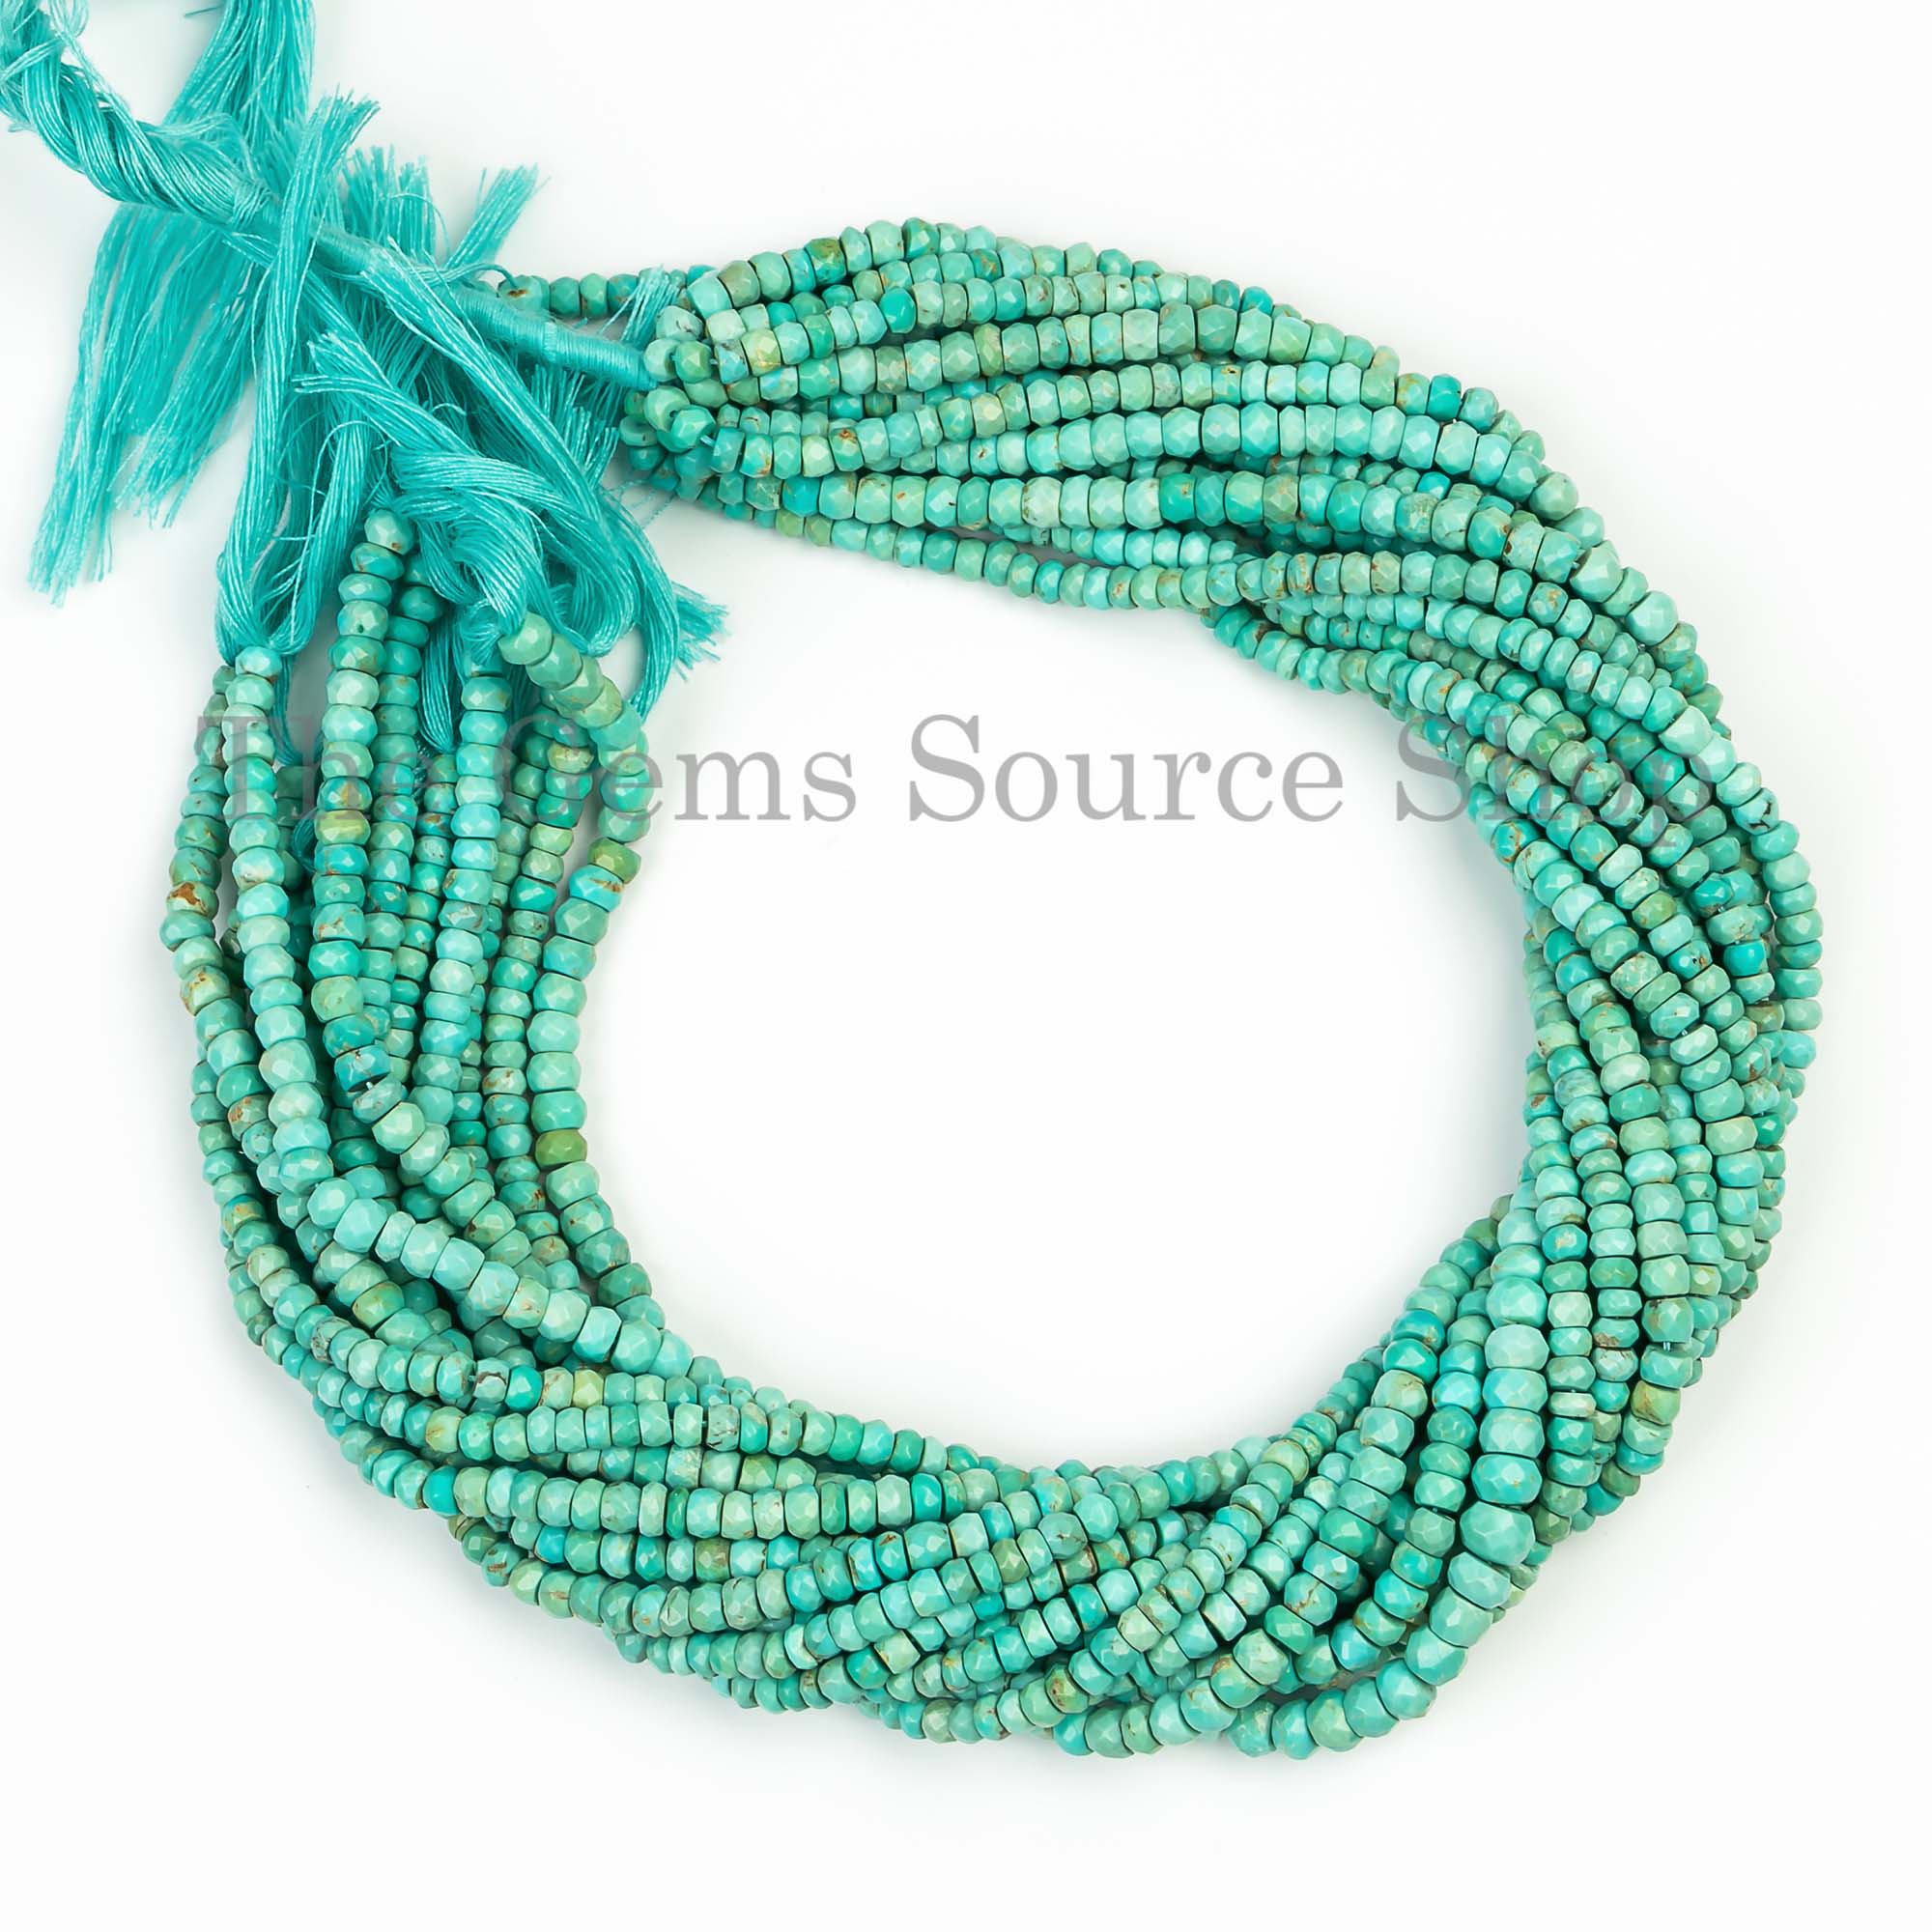 Best Selling Turquoise Beads, Turquoise Faceted Rondelle Beads, Turquoise Gemstone Beads